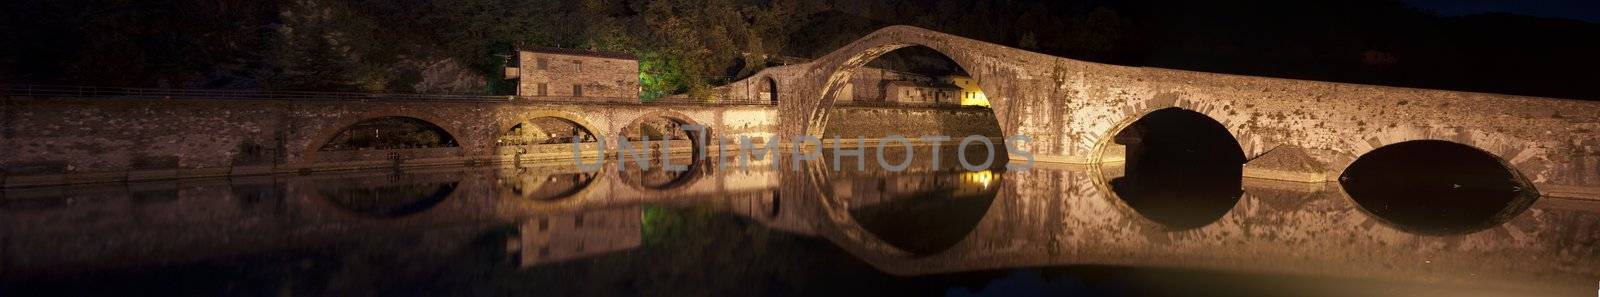 Colors and Reflections of Devils Bridge at Night, Italy